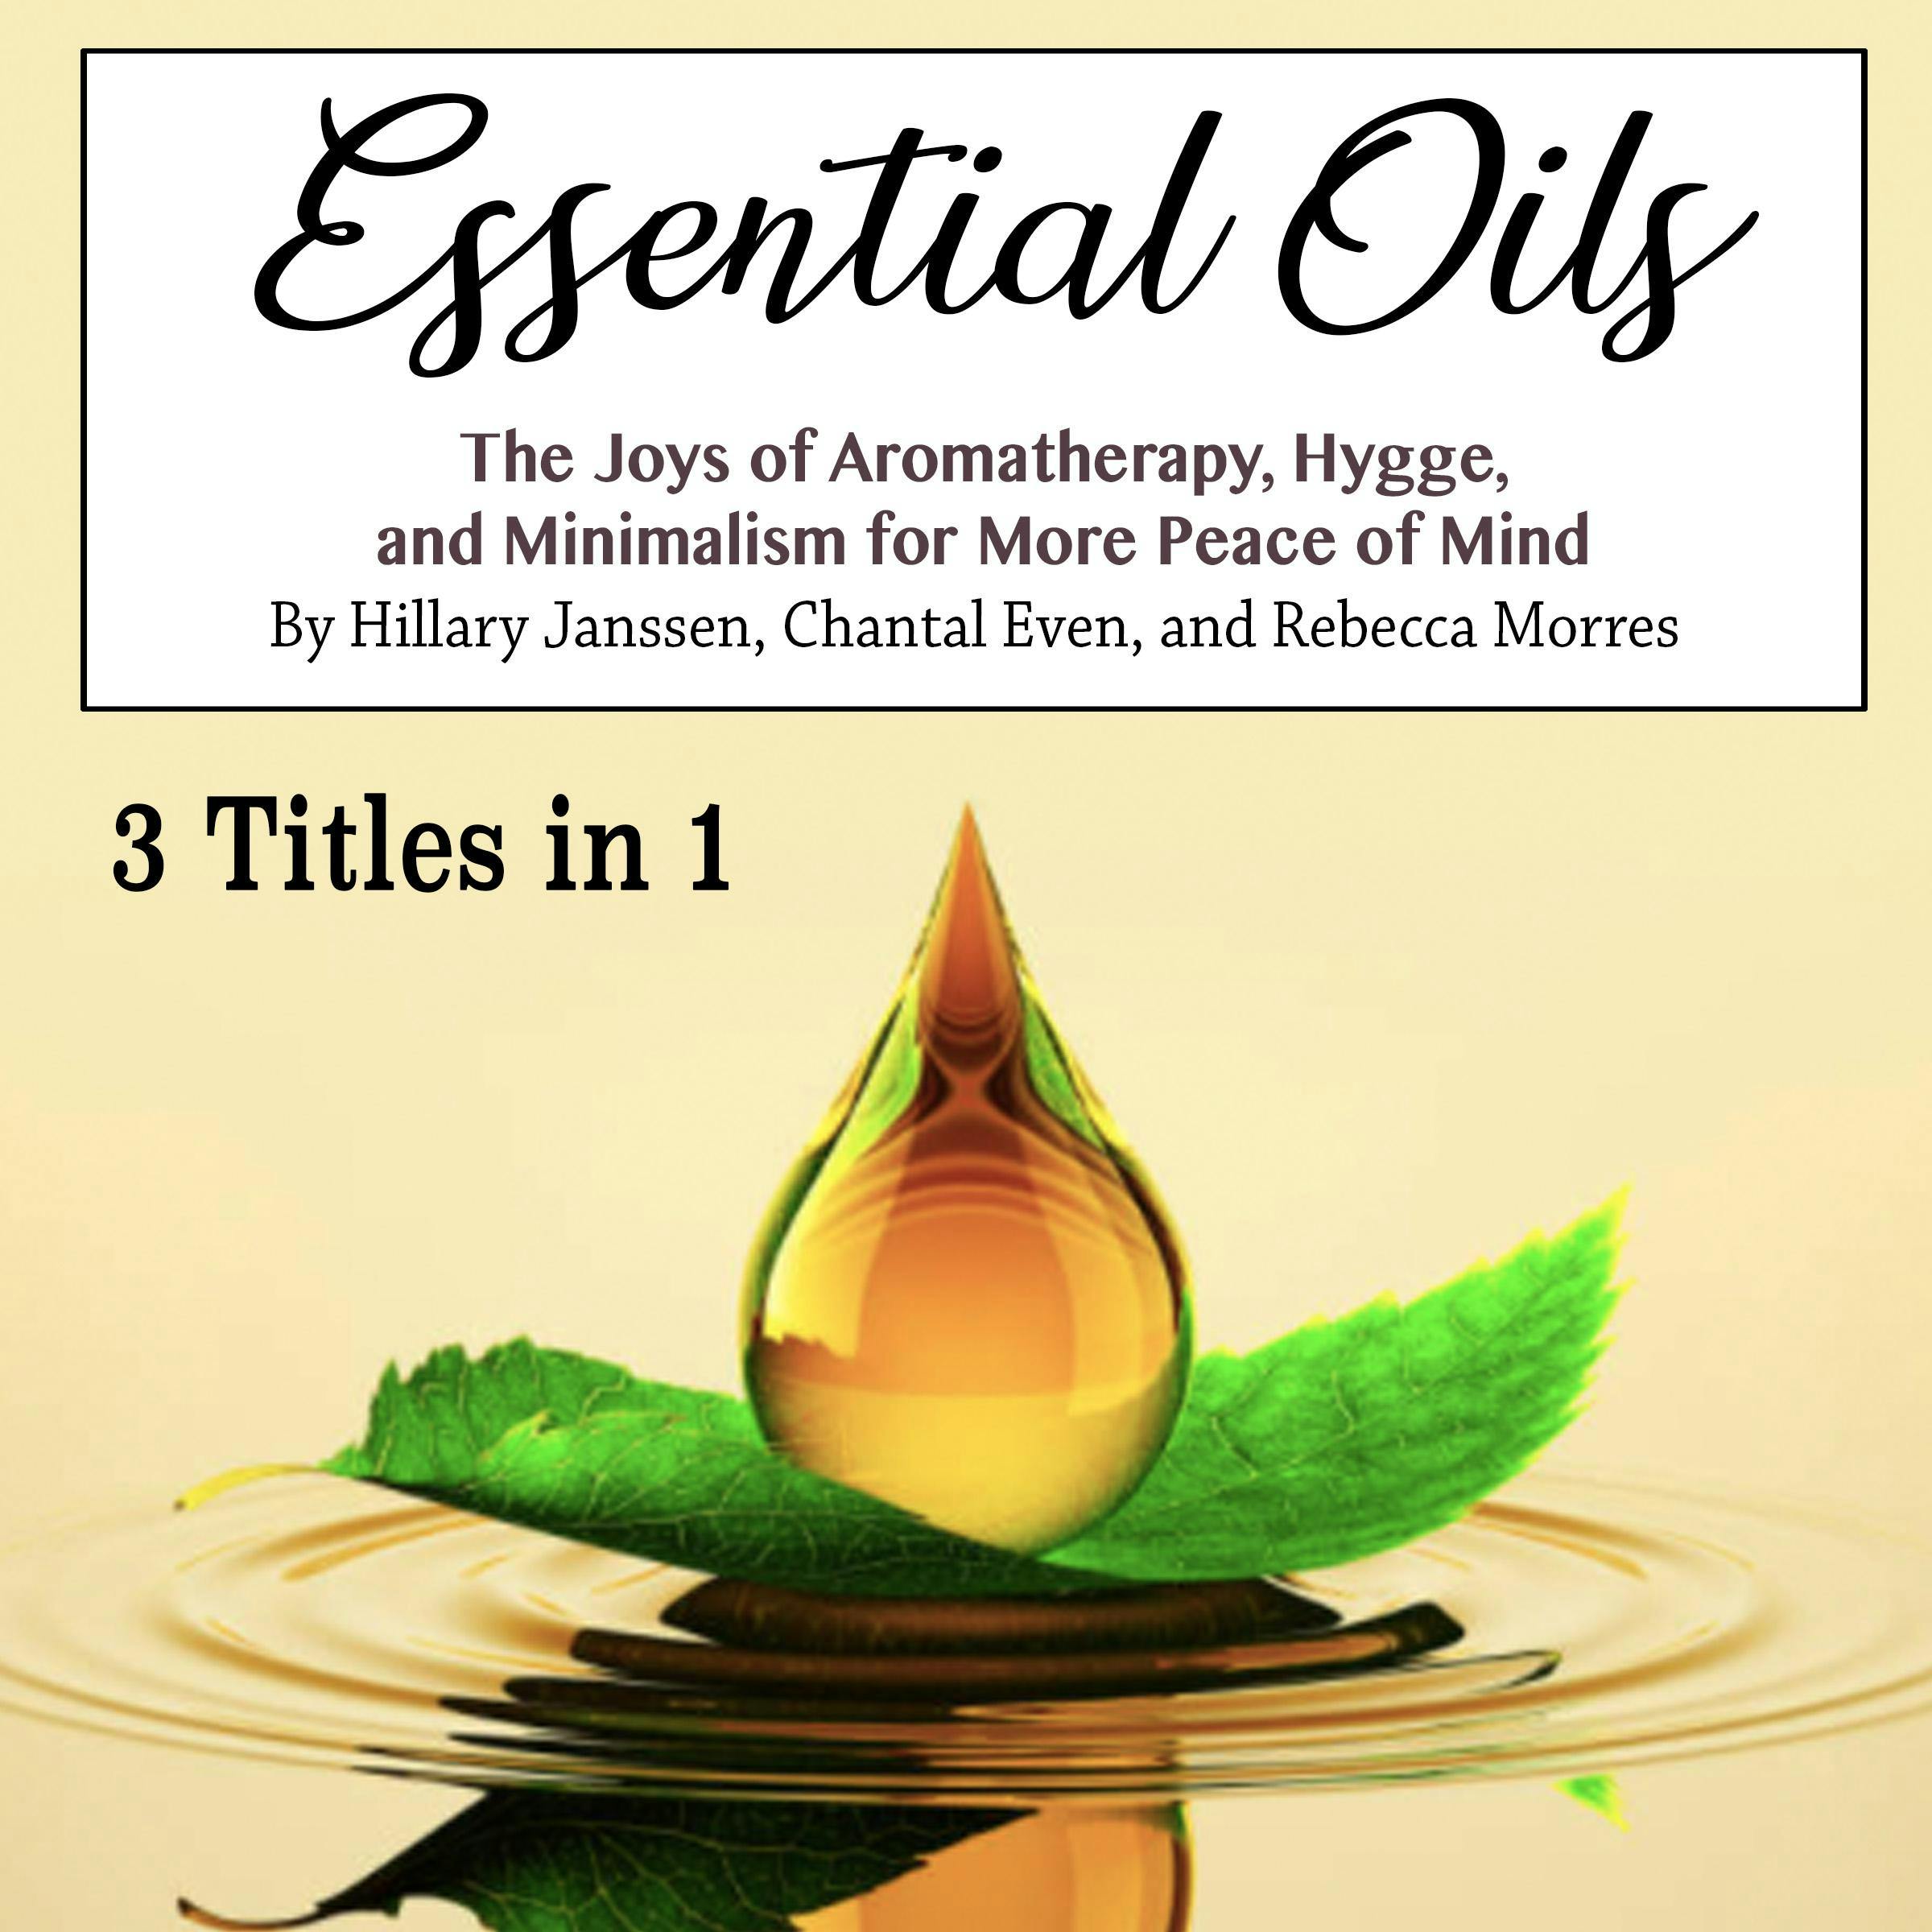 Essential Oils: The Joys of Aromatherapy, Hygge, and Minimalism for More Peace of Mind - Rebecca Morres, Hillary Janssen, Chantal Even